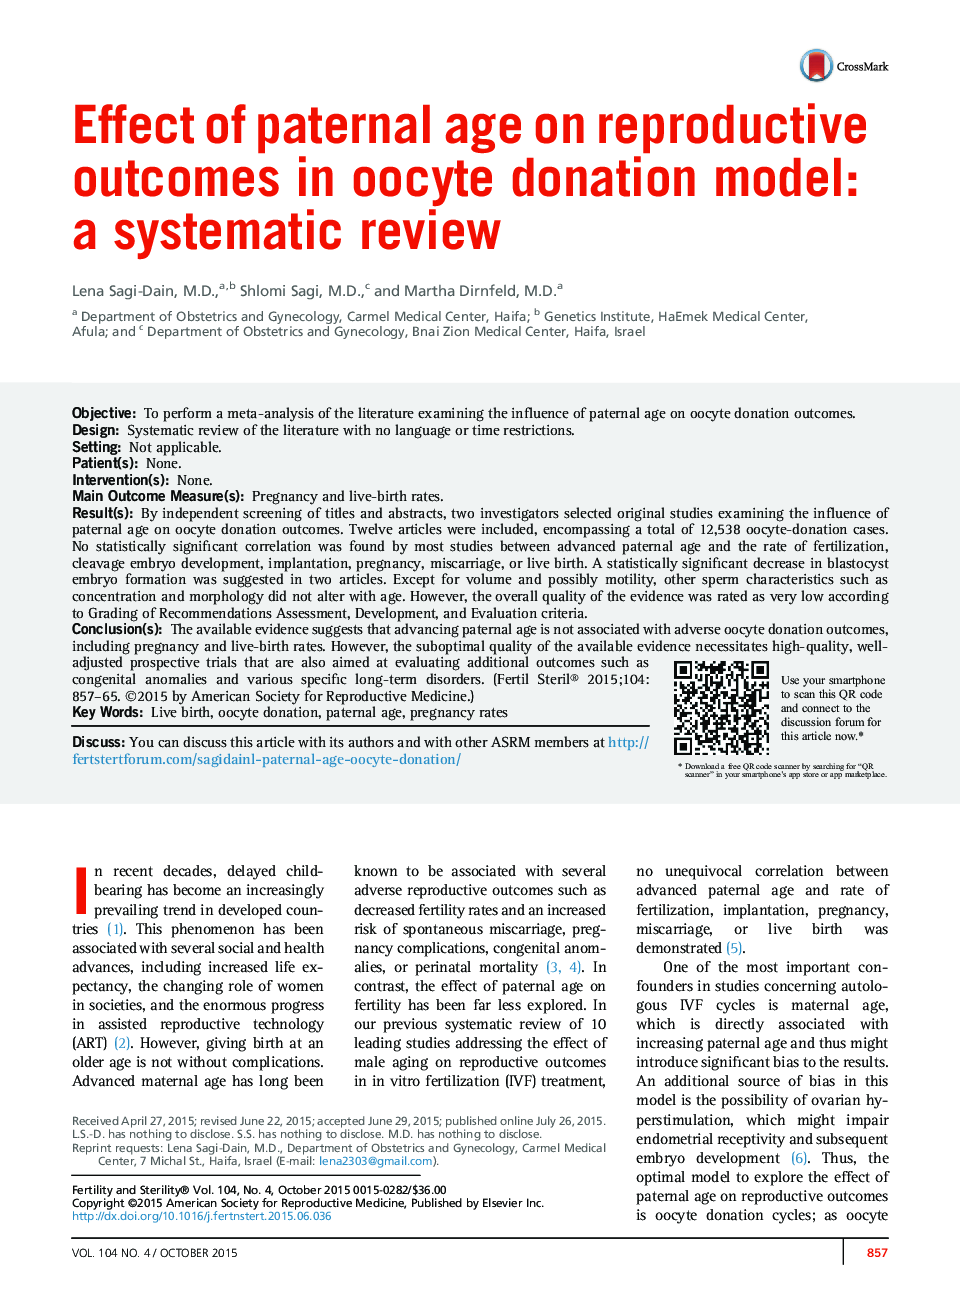 Effect of paternal age on reproductive outcomes in oocyte donation model: a systematic review